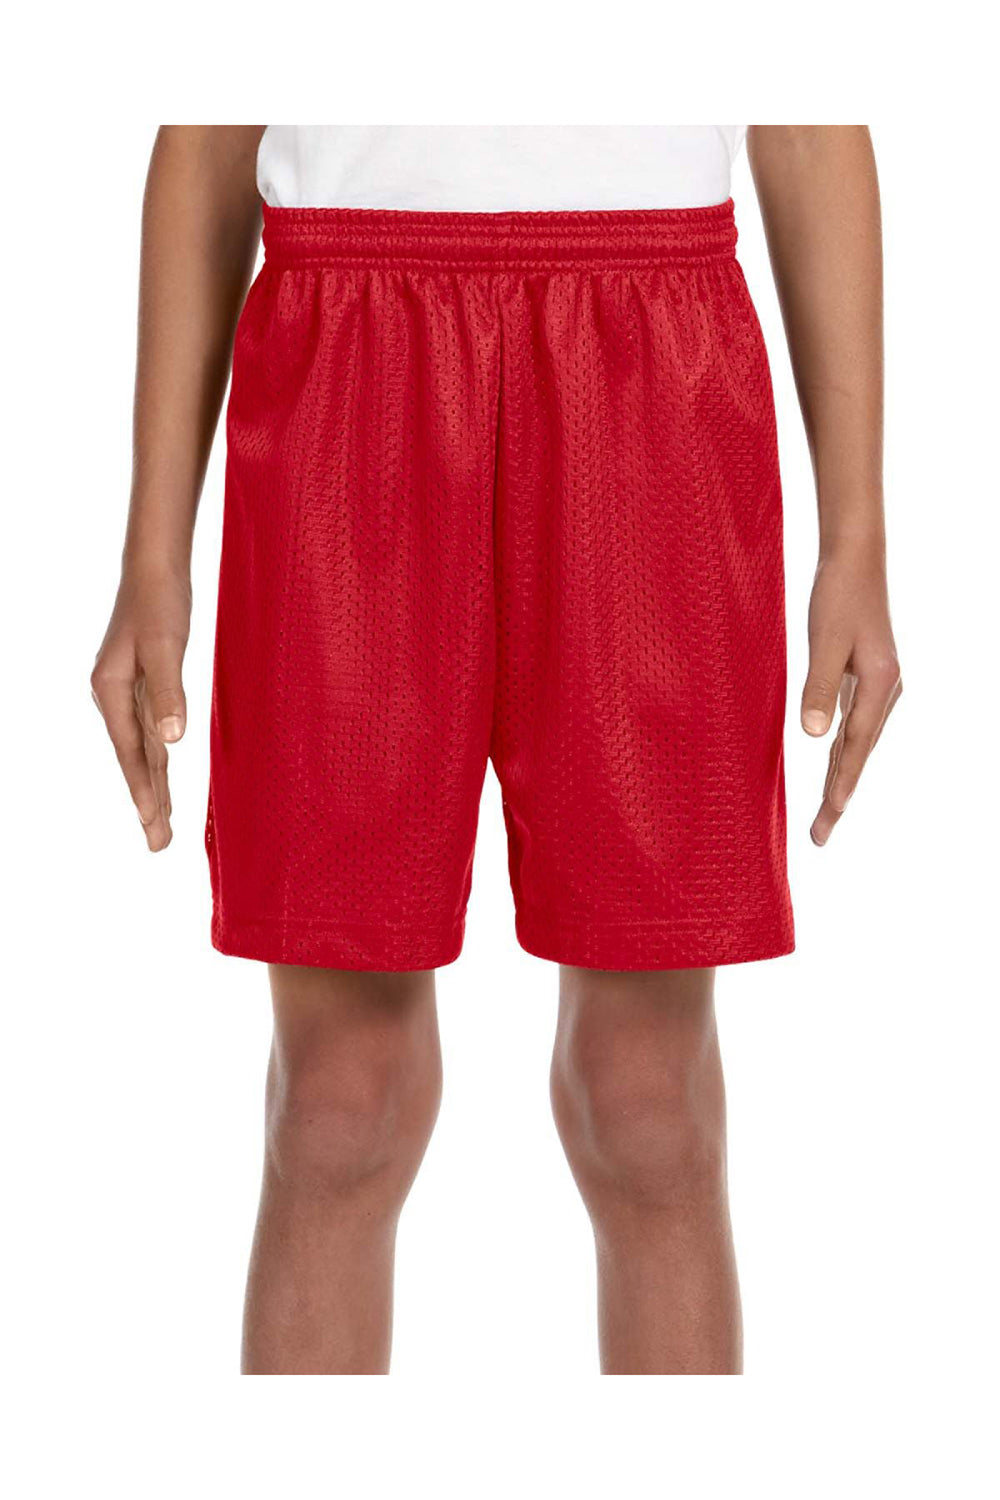 A4 NB5301 Youth Moisture Wicking Mesh Shorts Scarlet Red Model Front